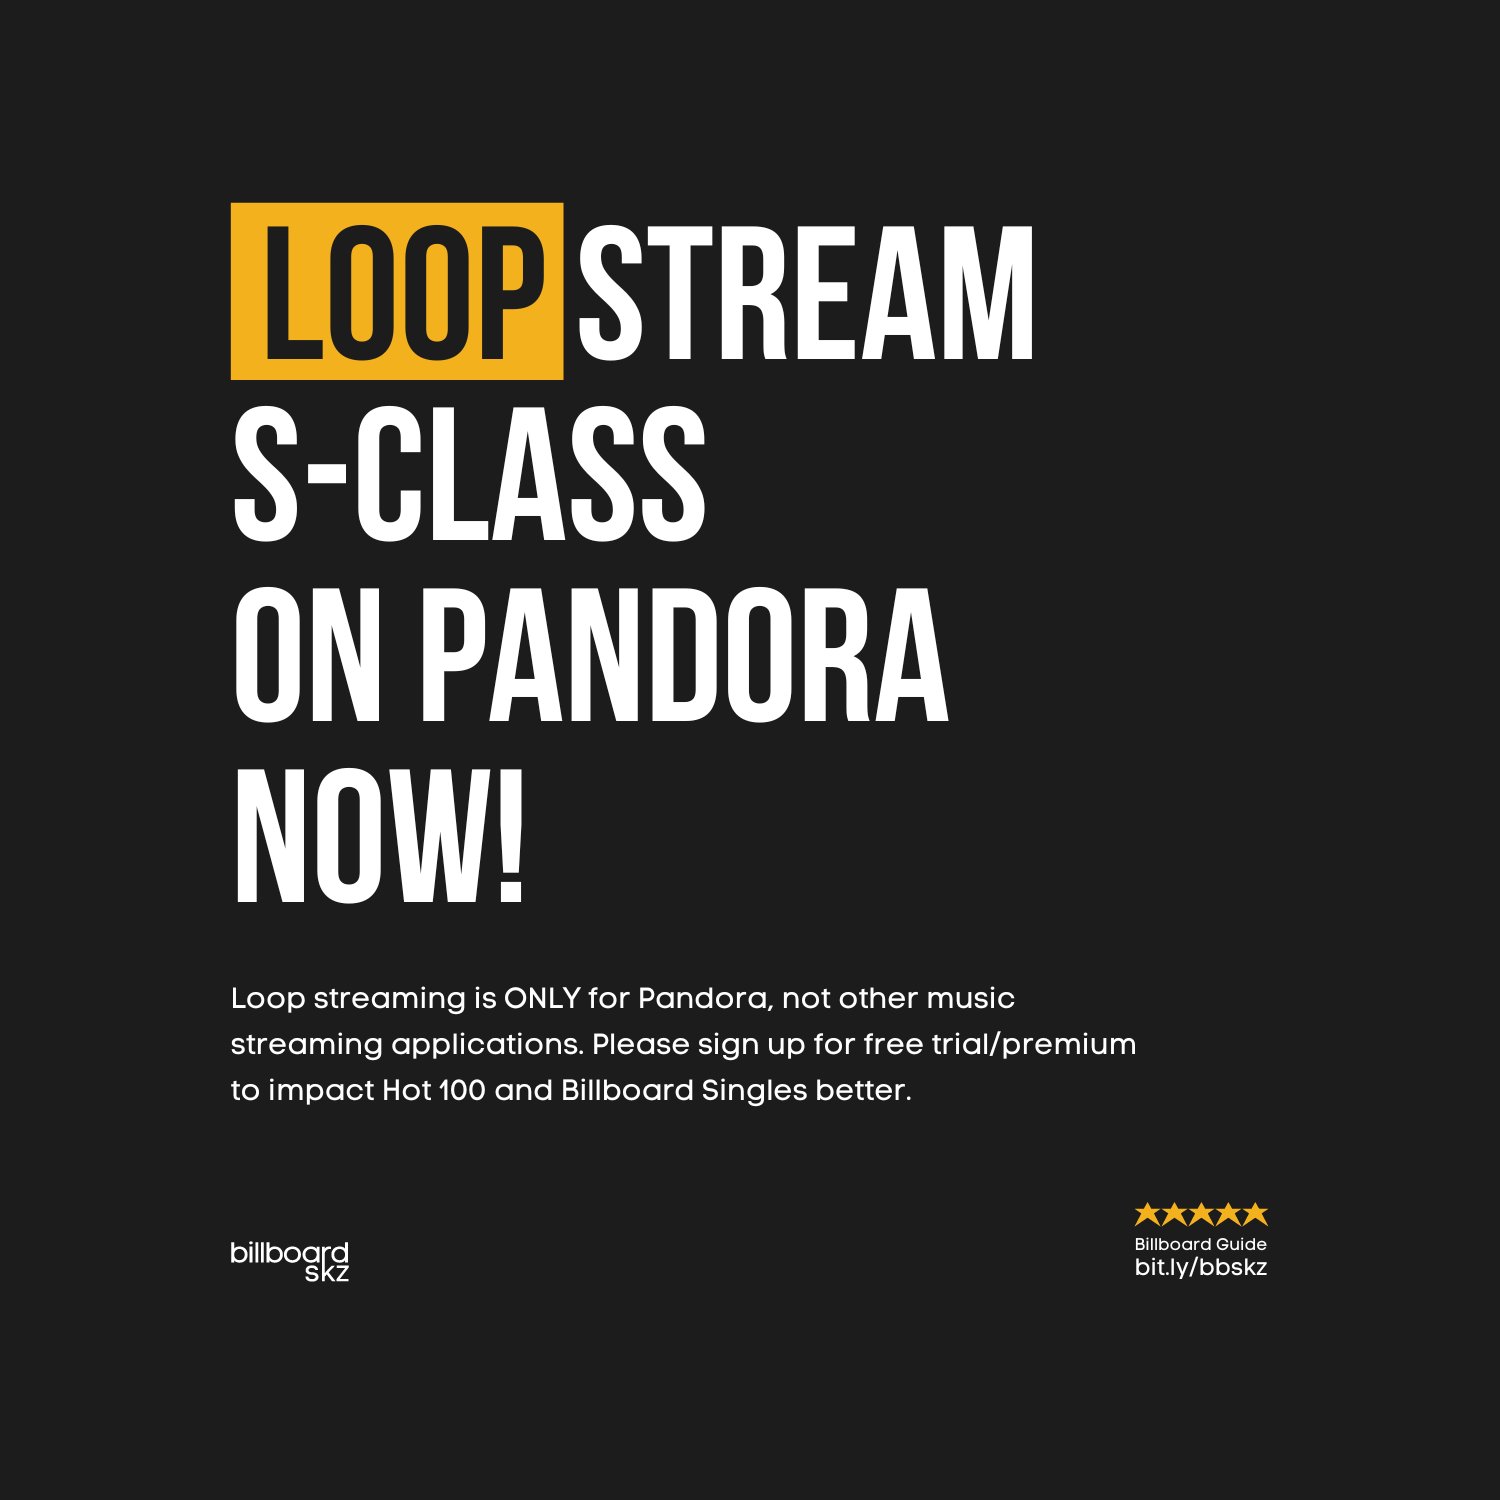 billboard SKZ on Twitter: "📣 🇺🇸🇵🇷 LOOP STREAM S-CLASS ON PANDORA NOW  Loop #S_CLASS until the tracking ends (last 2 days)! There were cases  before where songs not predicted to debut on